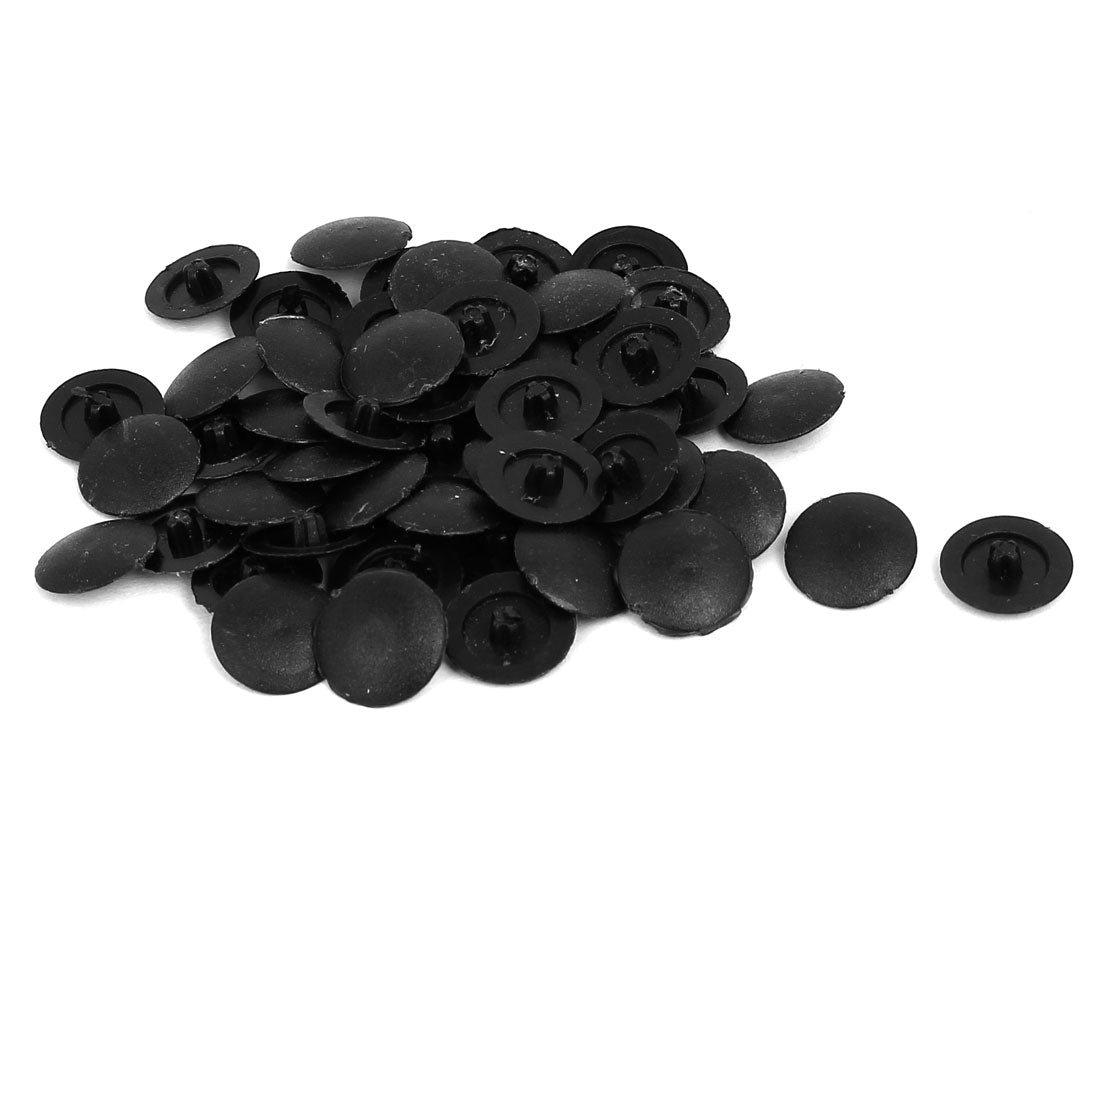 uxcell Uxcell 12mm Dia Plastic Phillips Screw Cap Hole Plugs Dust Proof Covers Black 50pcs